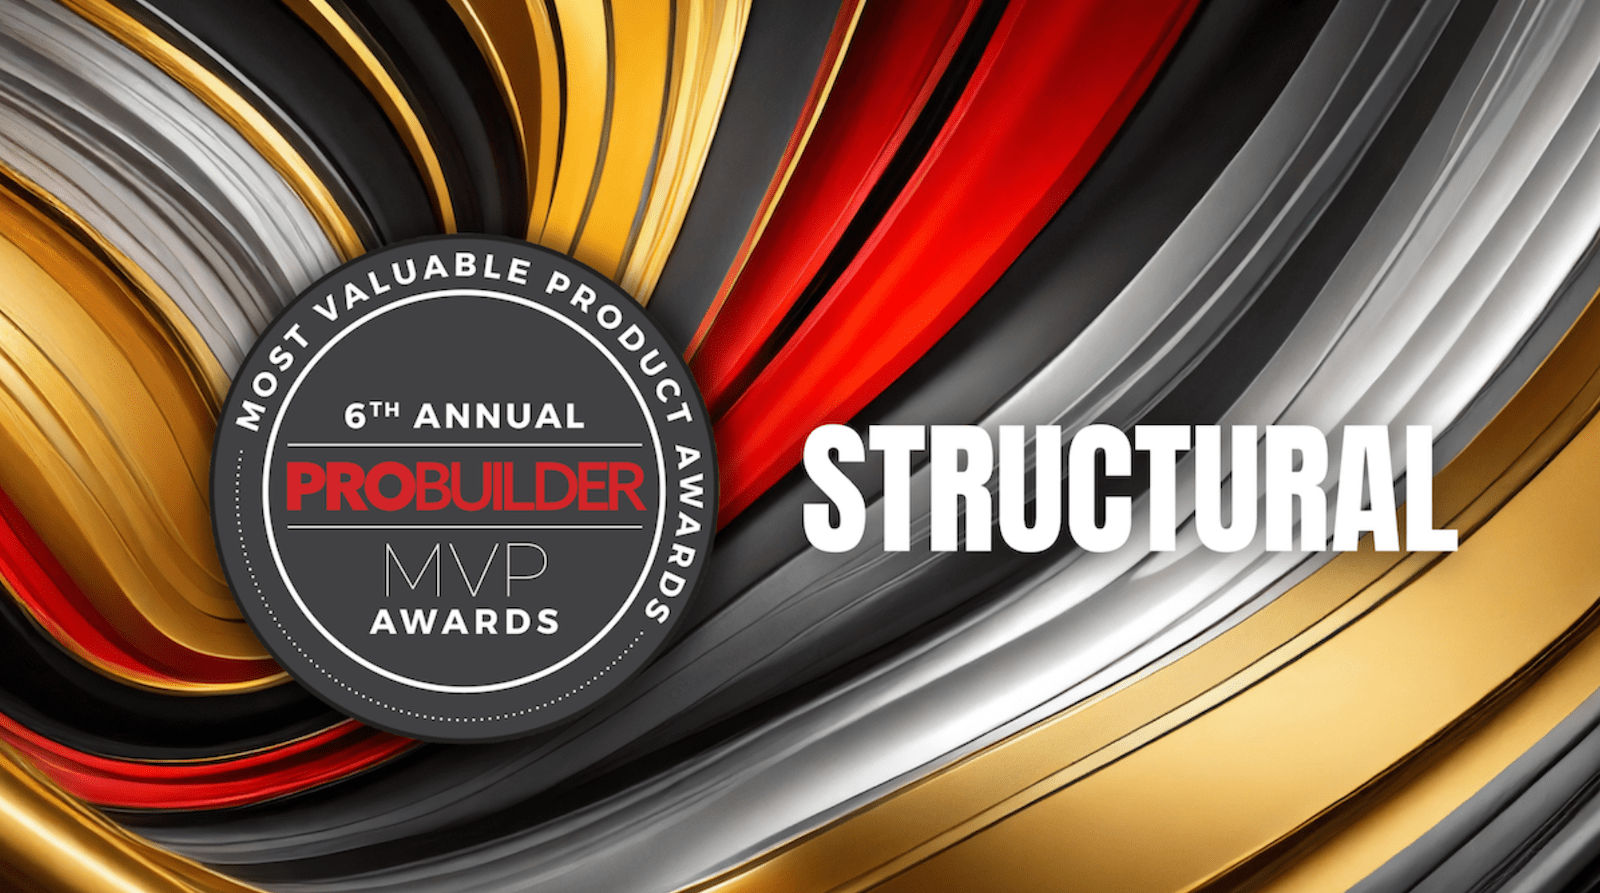 6th Annual MVP Awards Structural category